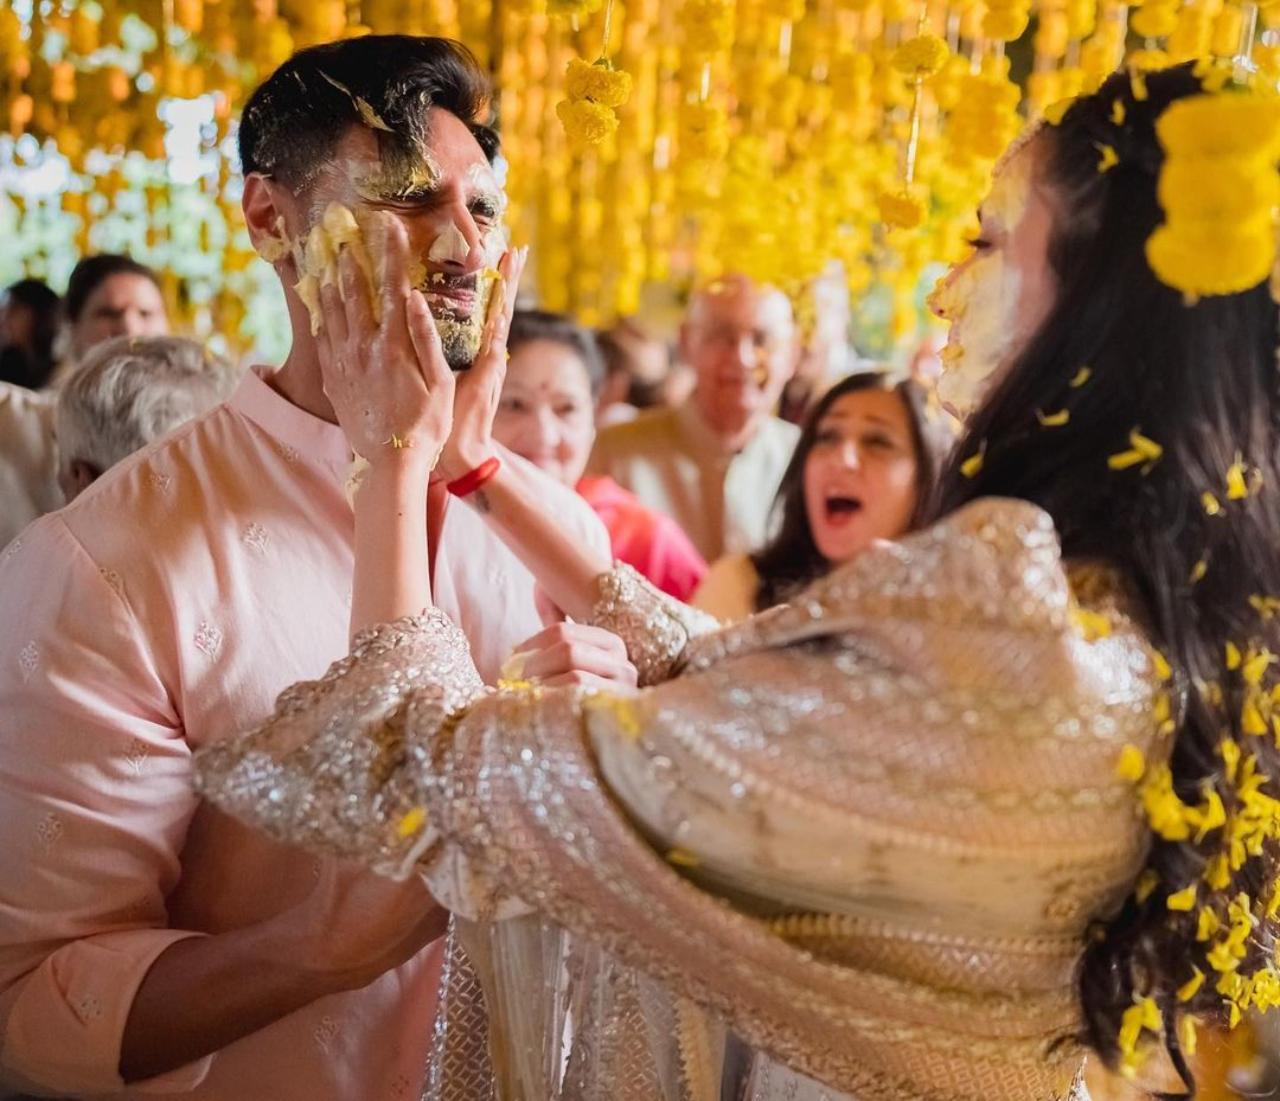 Athiya also shared a picture with her brother Ahan Shetty where the two are seen applying haldi on each other. Ahan had also shared pictures of him walking Athiya down the aisle towards the mandap and picture with the newlyweds